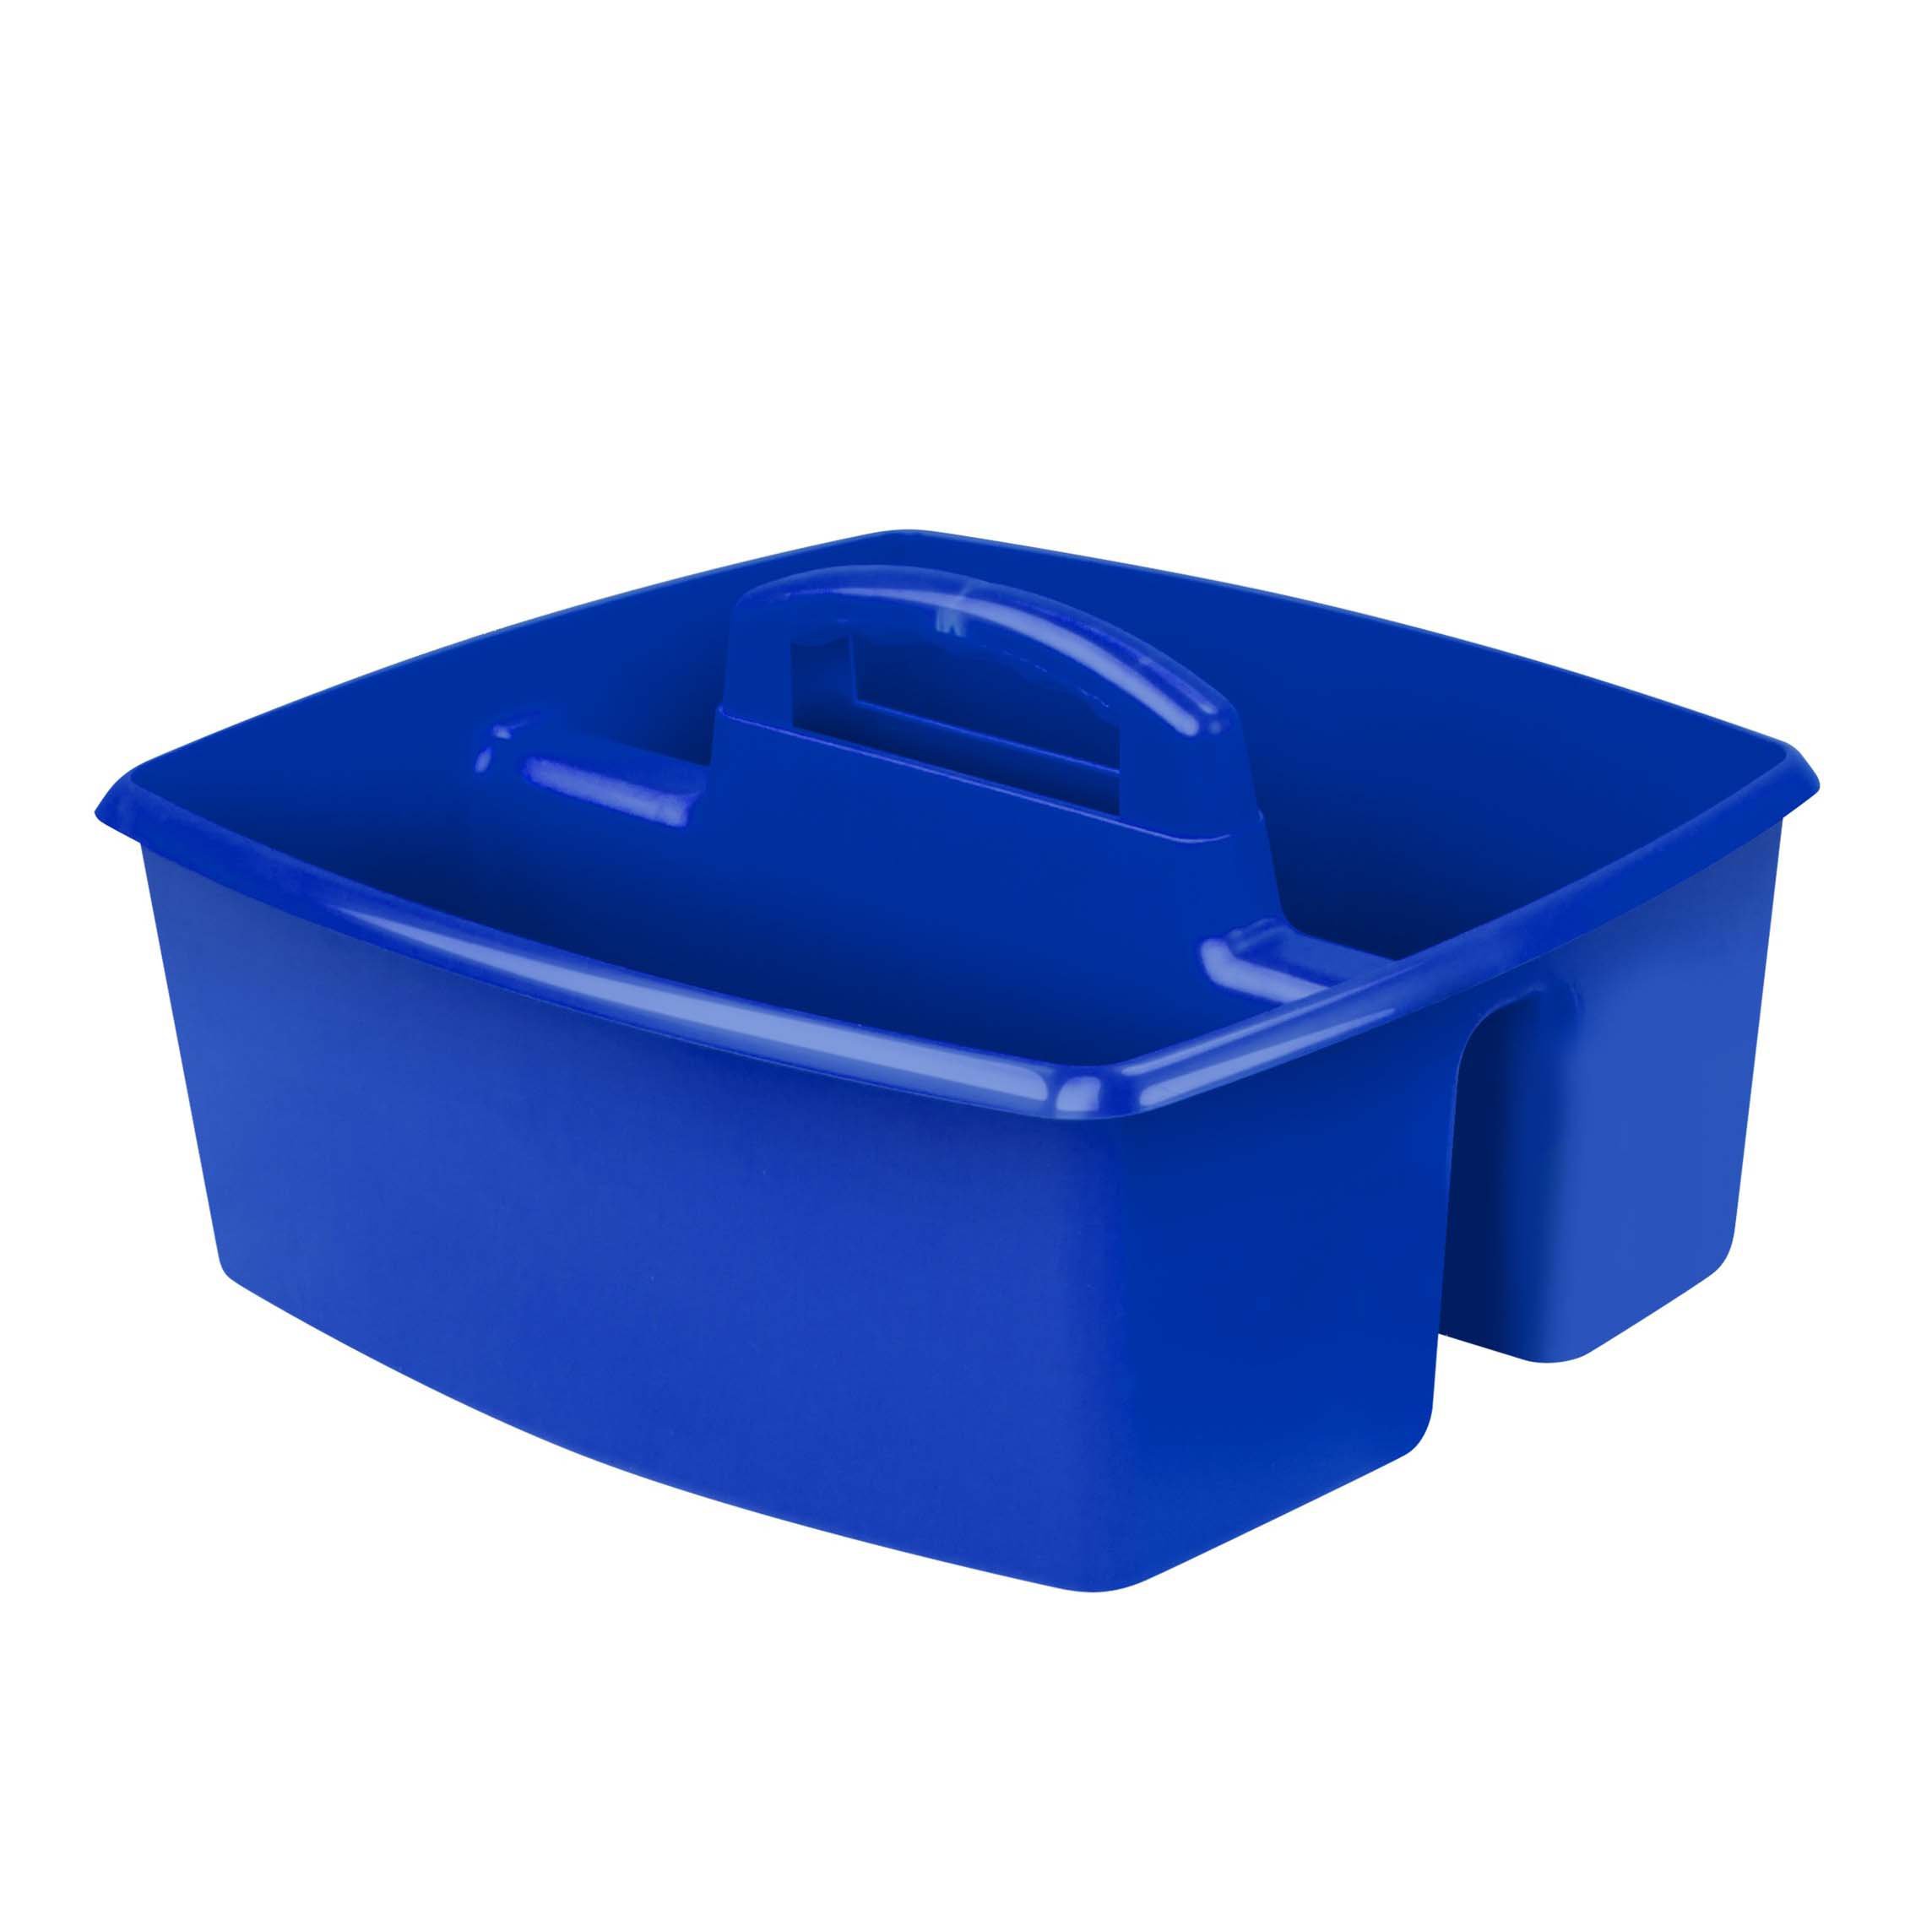 Buckets & Caddies - Shop H-E-B Everyday Low Prices